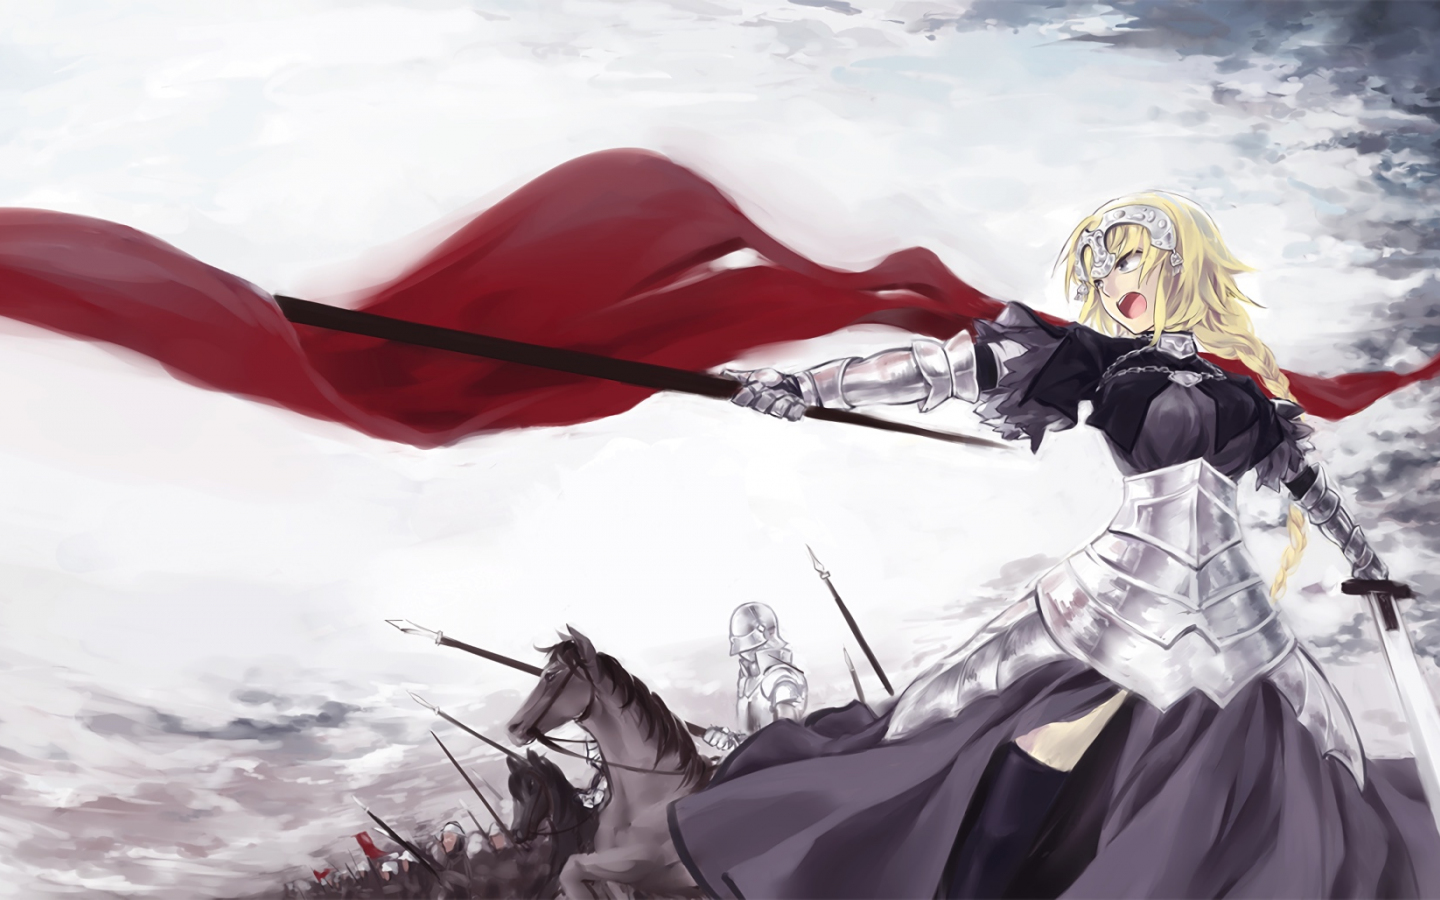 Download 1440x900 Wallpaper Ruler Fate Apocrypha Blonde Anime Girl Warrior Widescreen 16 10 Widescreen 1440x900 Hd Image Background 031